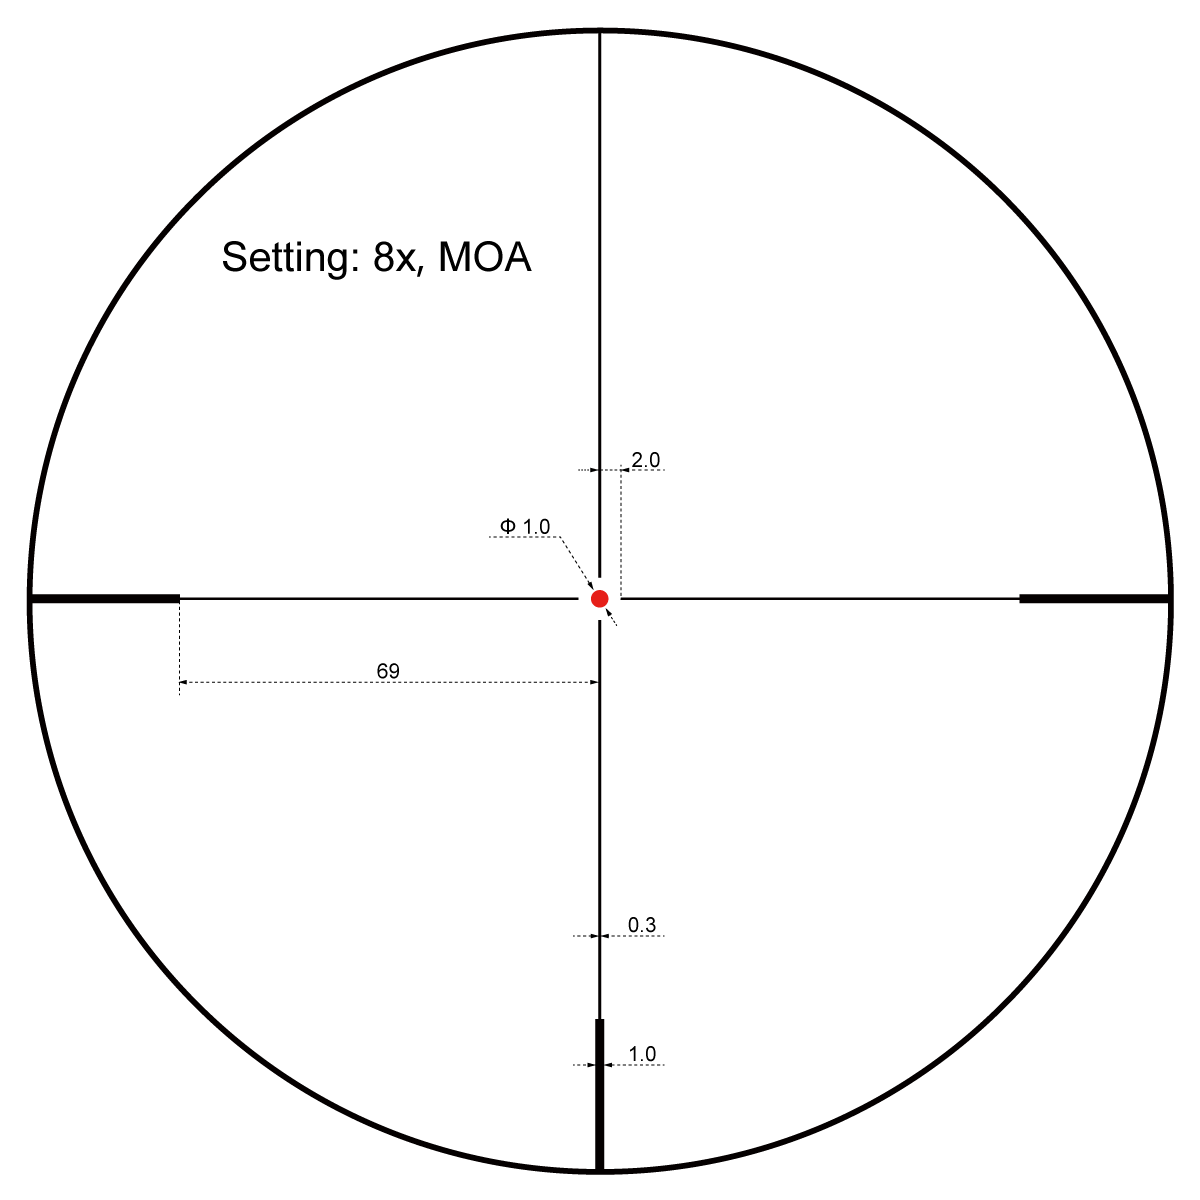 SCOC-39 Forester 1-8x24 Coyote FDE Reticle Diagram